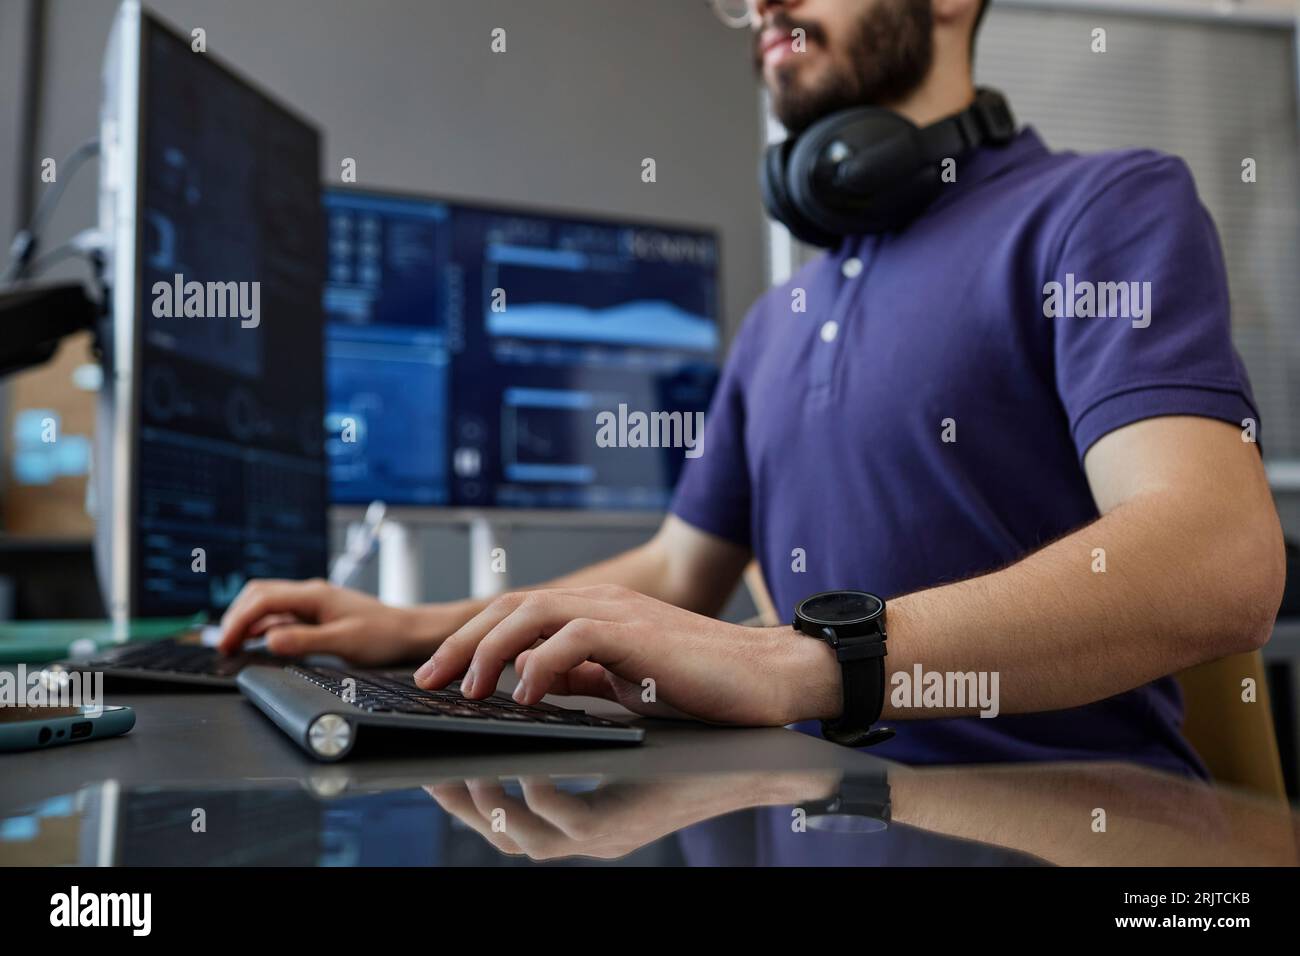 IT professional typing on computer keyboard at desk Stock Photo